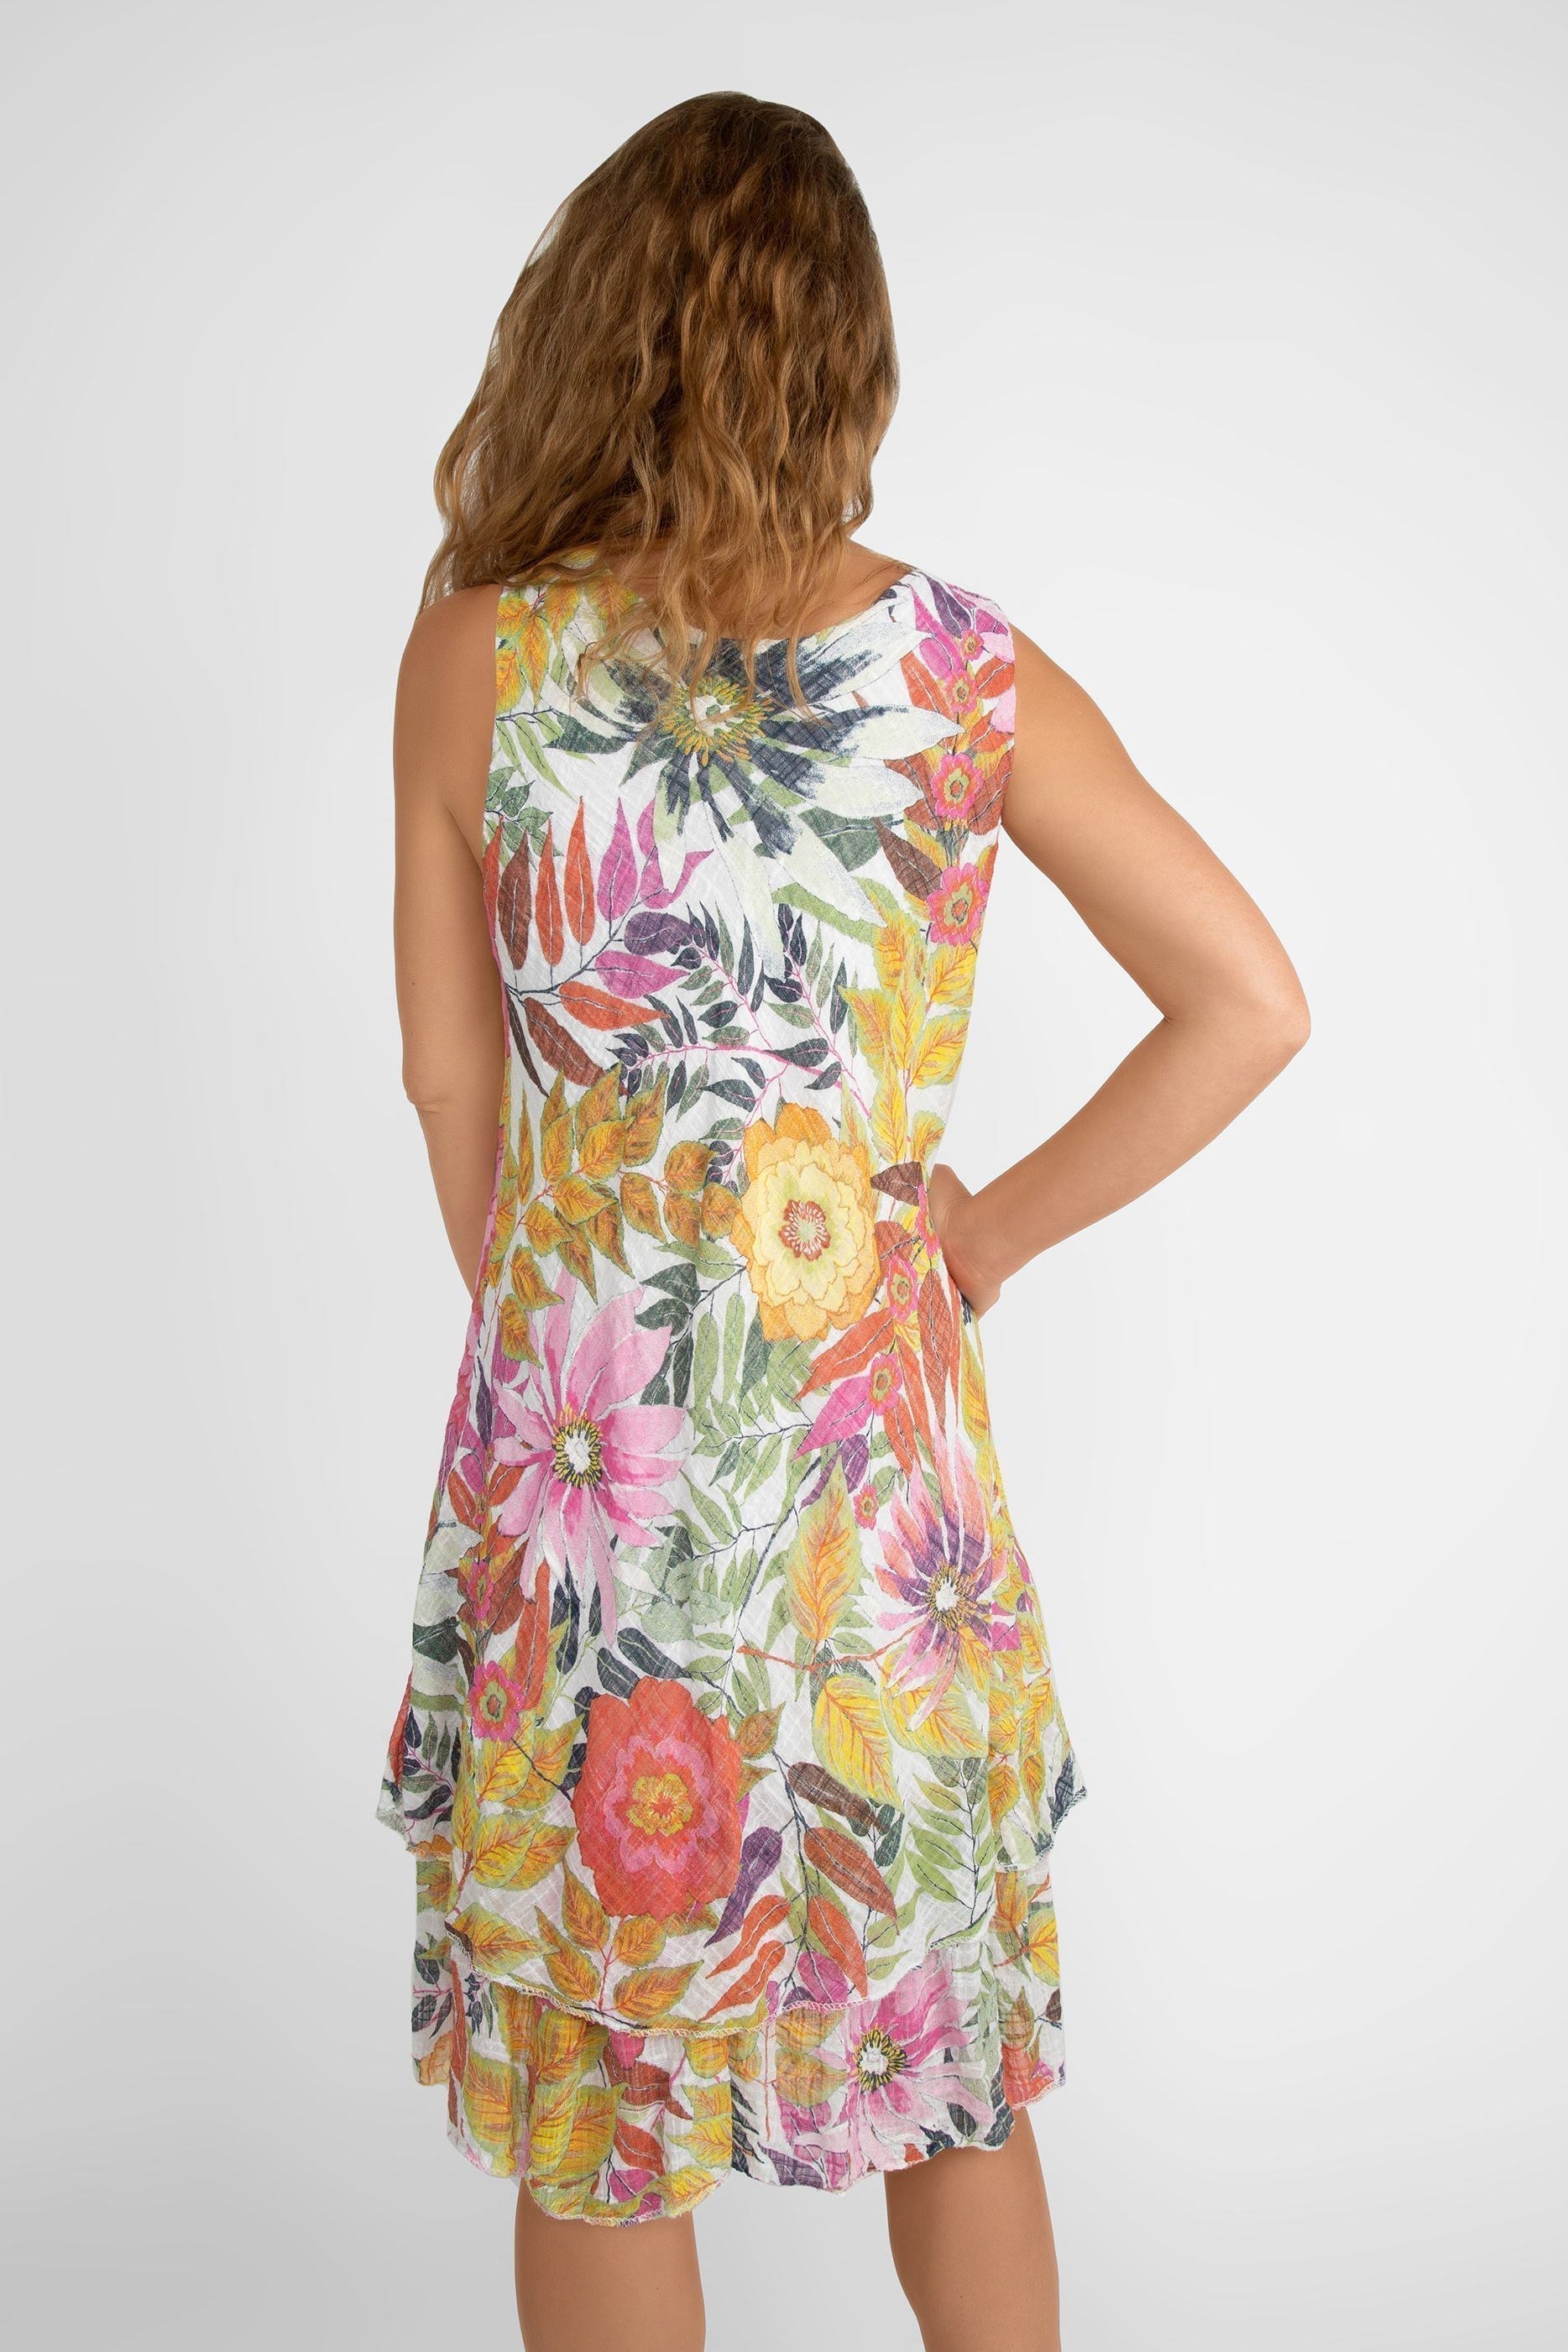 Back view of Me & Gee (S24-16-8903) Women's Sleeveless Cotton Gauze Knee Length Summer Dress in Multi-coloured floral print